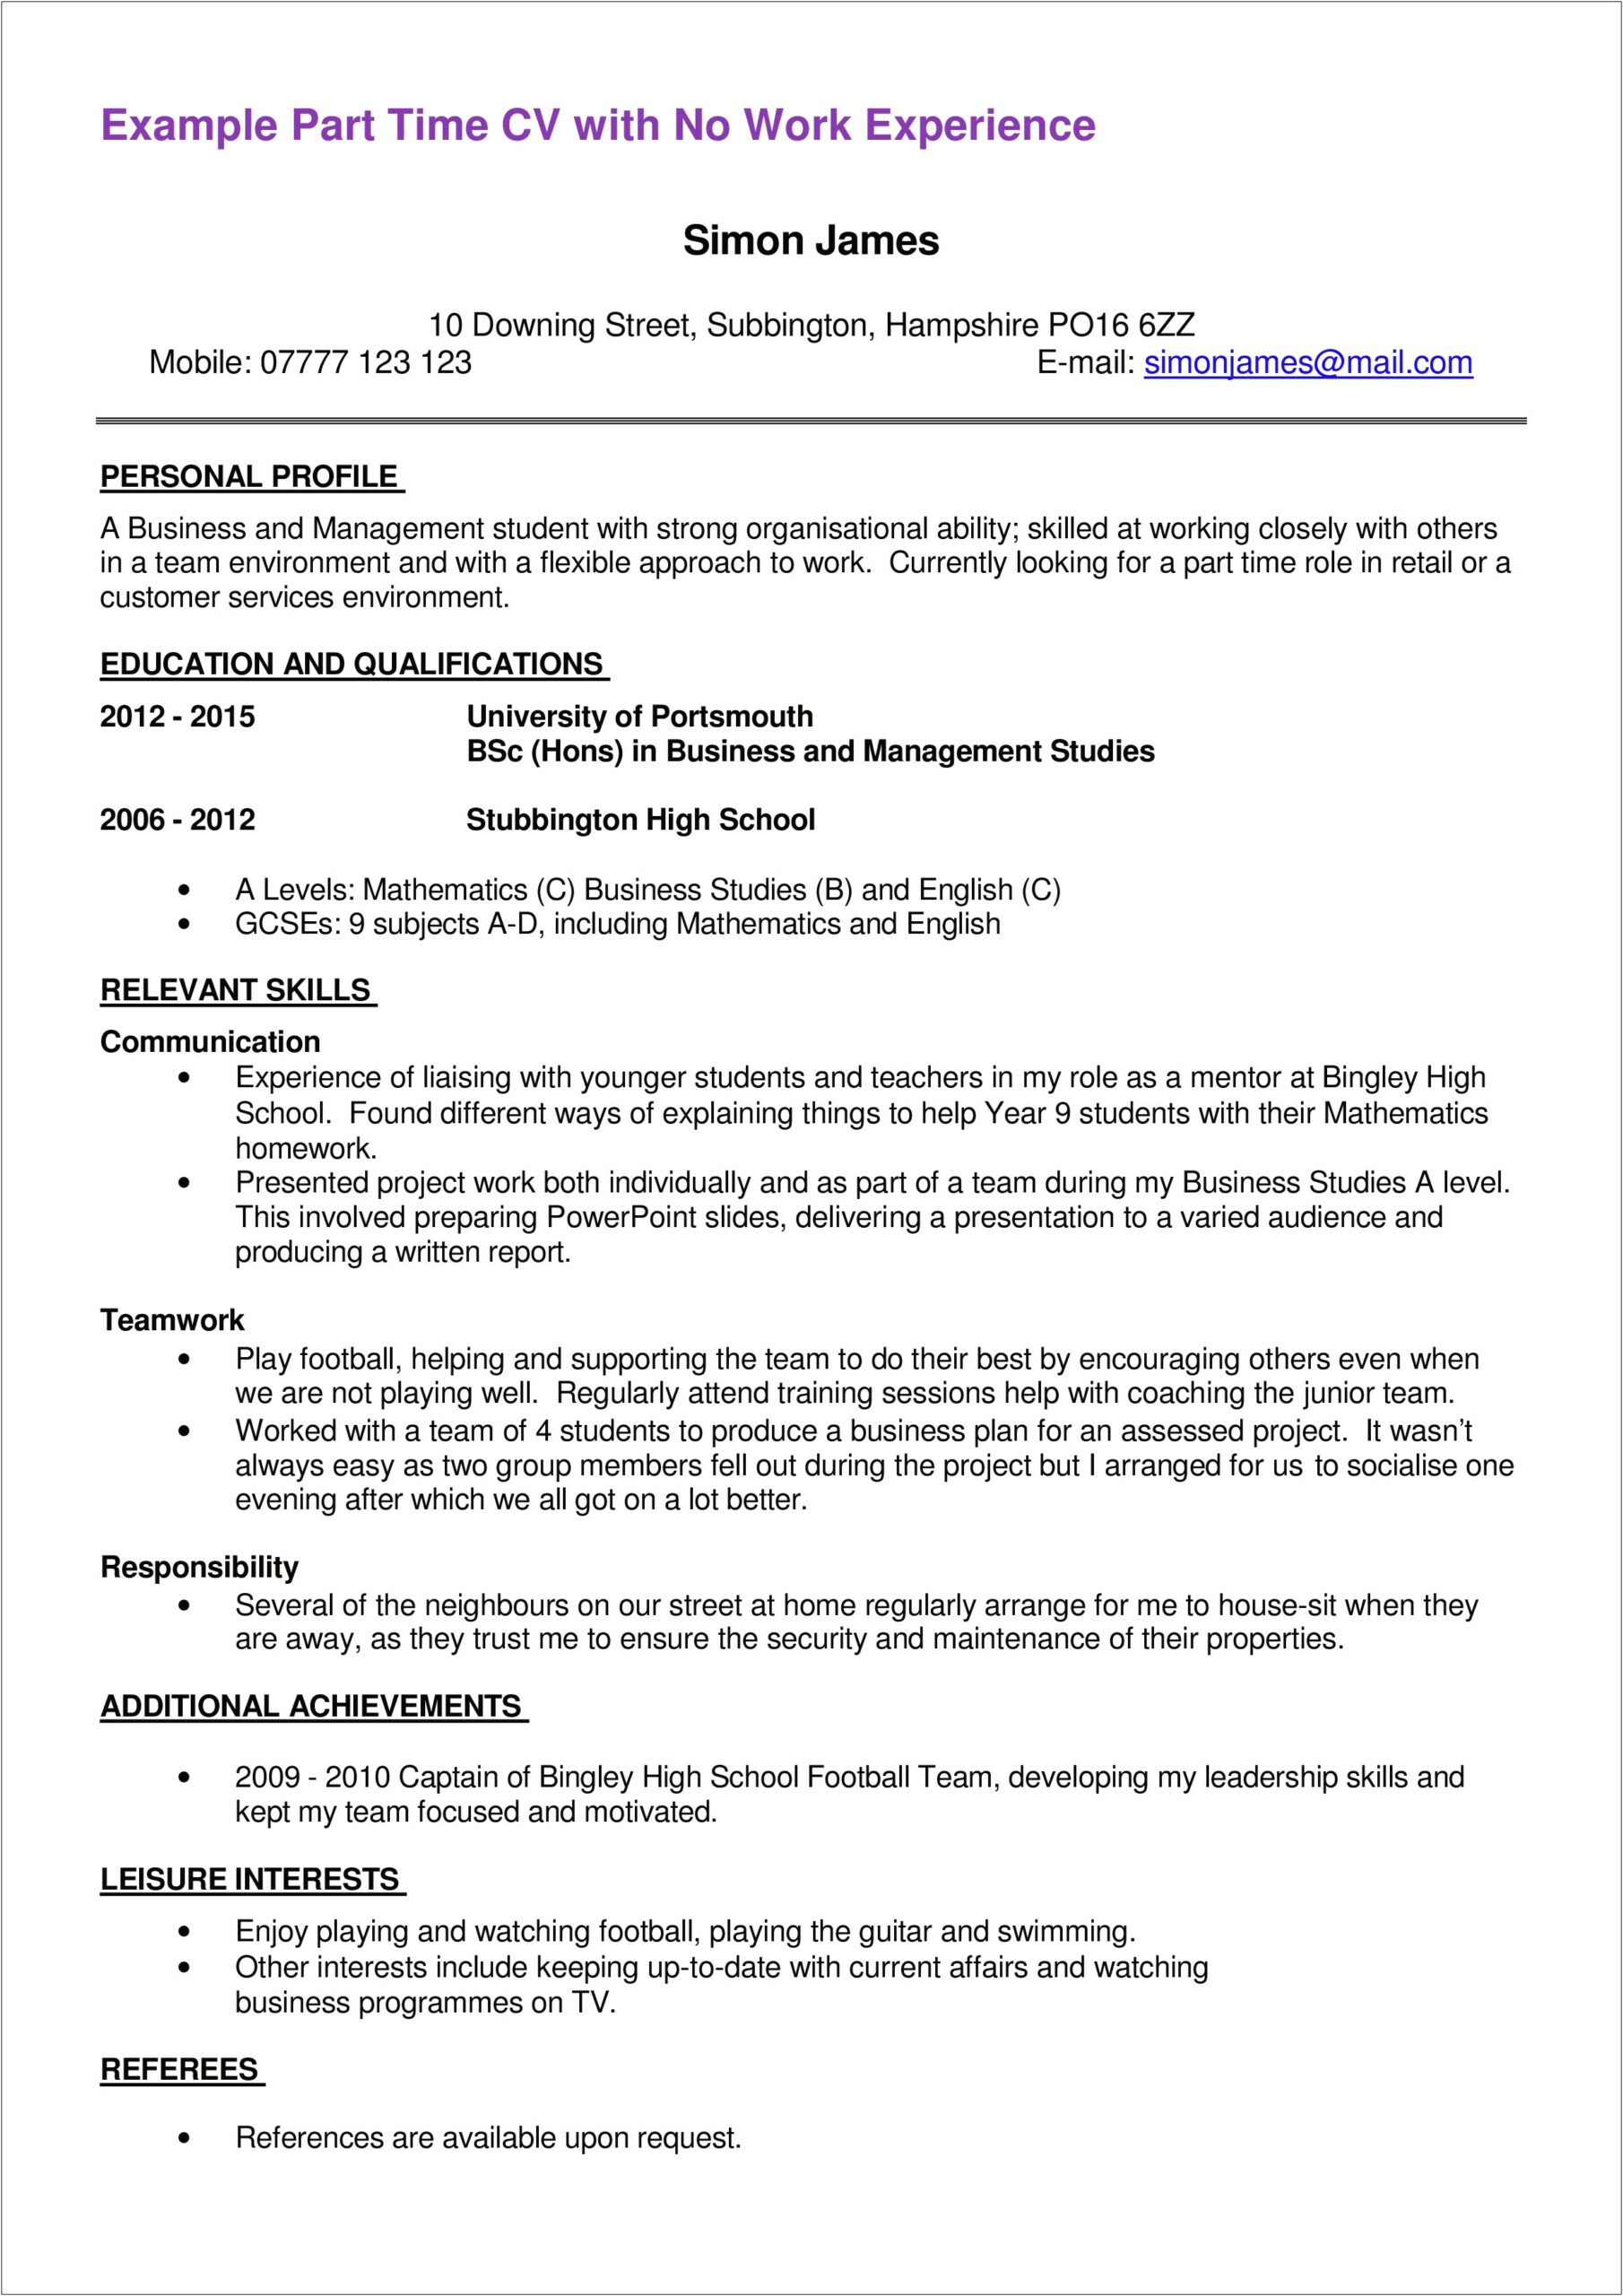 Sample Resume With Part Time Job Experience